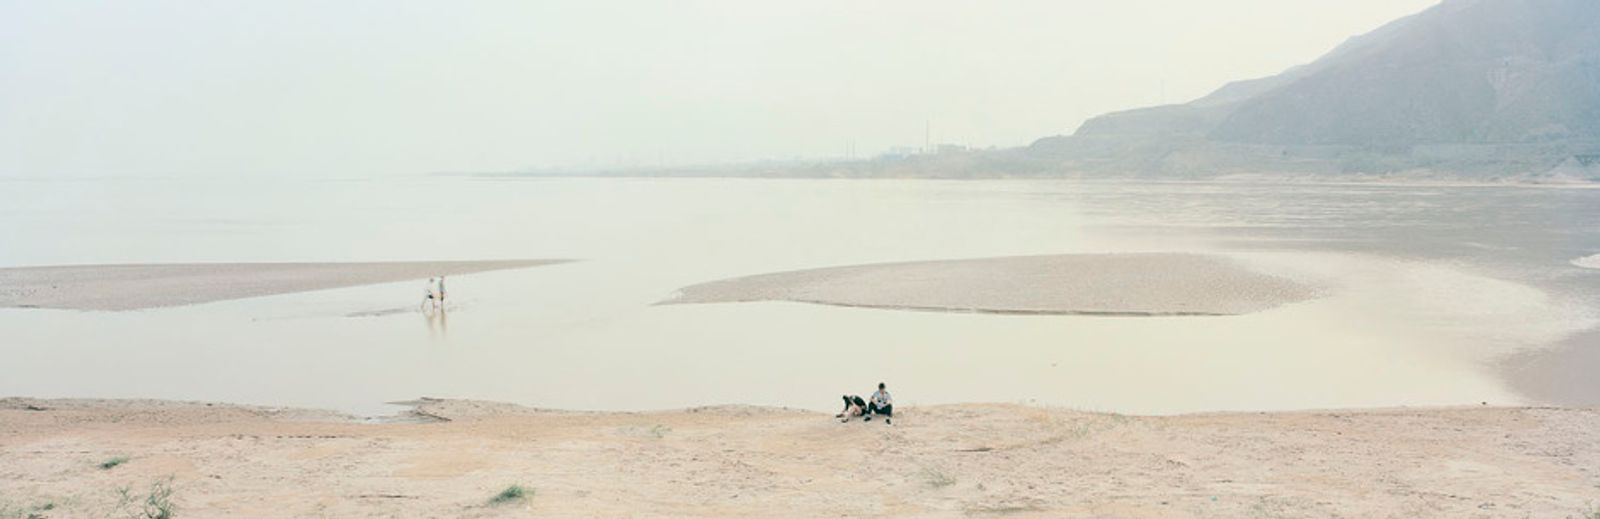 © Ian Teh - Image from the Traces : Landscapes in transition on the Yellow River Basin photography project